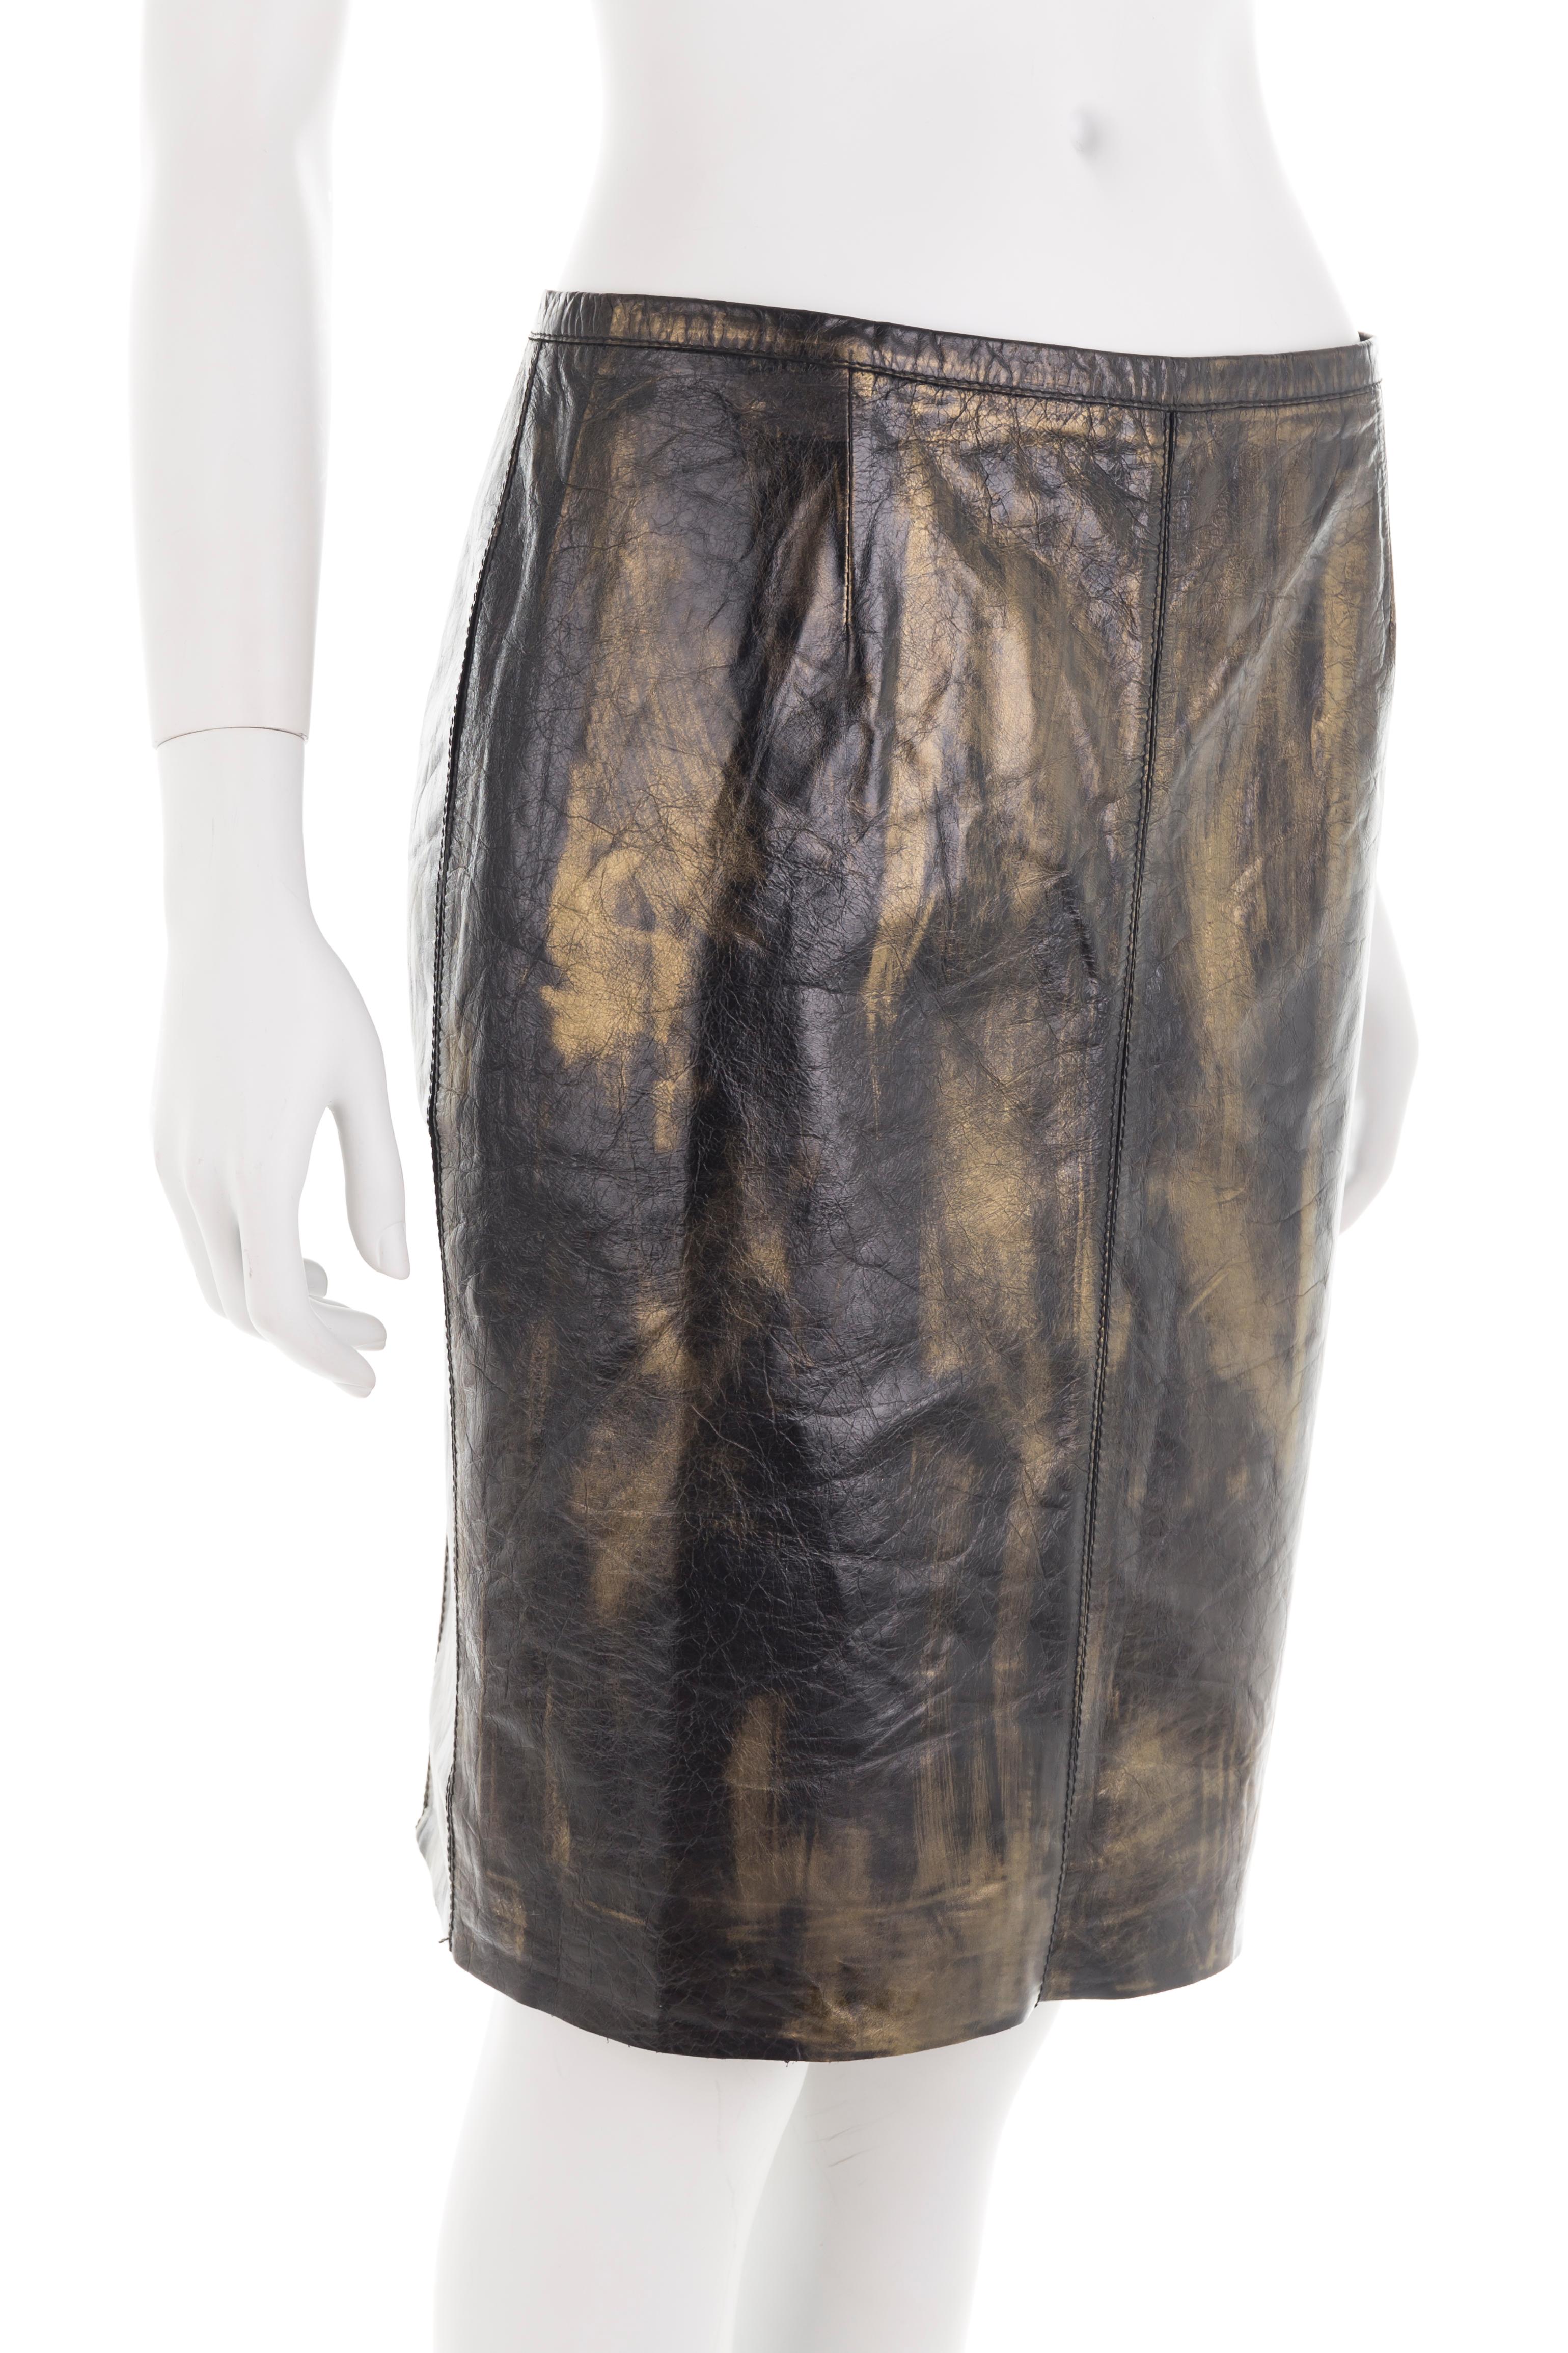 - Roberto Cavalli distressed leather skirt
- Sold by Gold Palms Vintage
- Spring/Summer 2001
- Brown leather with golden metallic hues
- Multi-paneled with mid tulle underlay
- Pencil fit
- Side zipper with hook
- Size S
